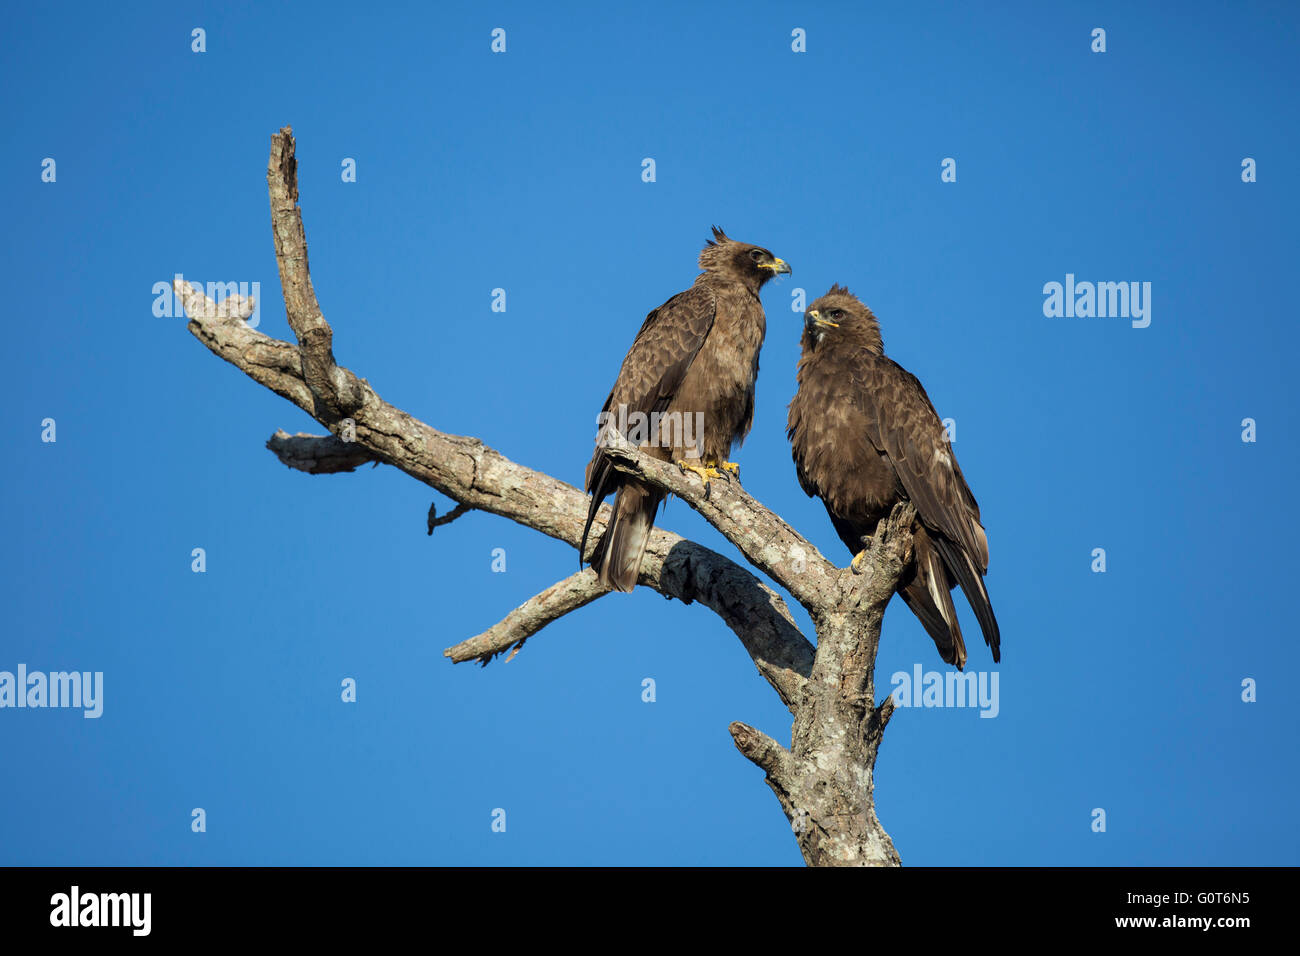 Pair of Wahlberg's eagle (Hieraaetus wahlbergi, formerly Aquila wahlbergi) eagles perched on a tree Stock Photo